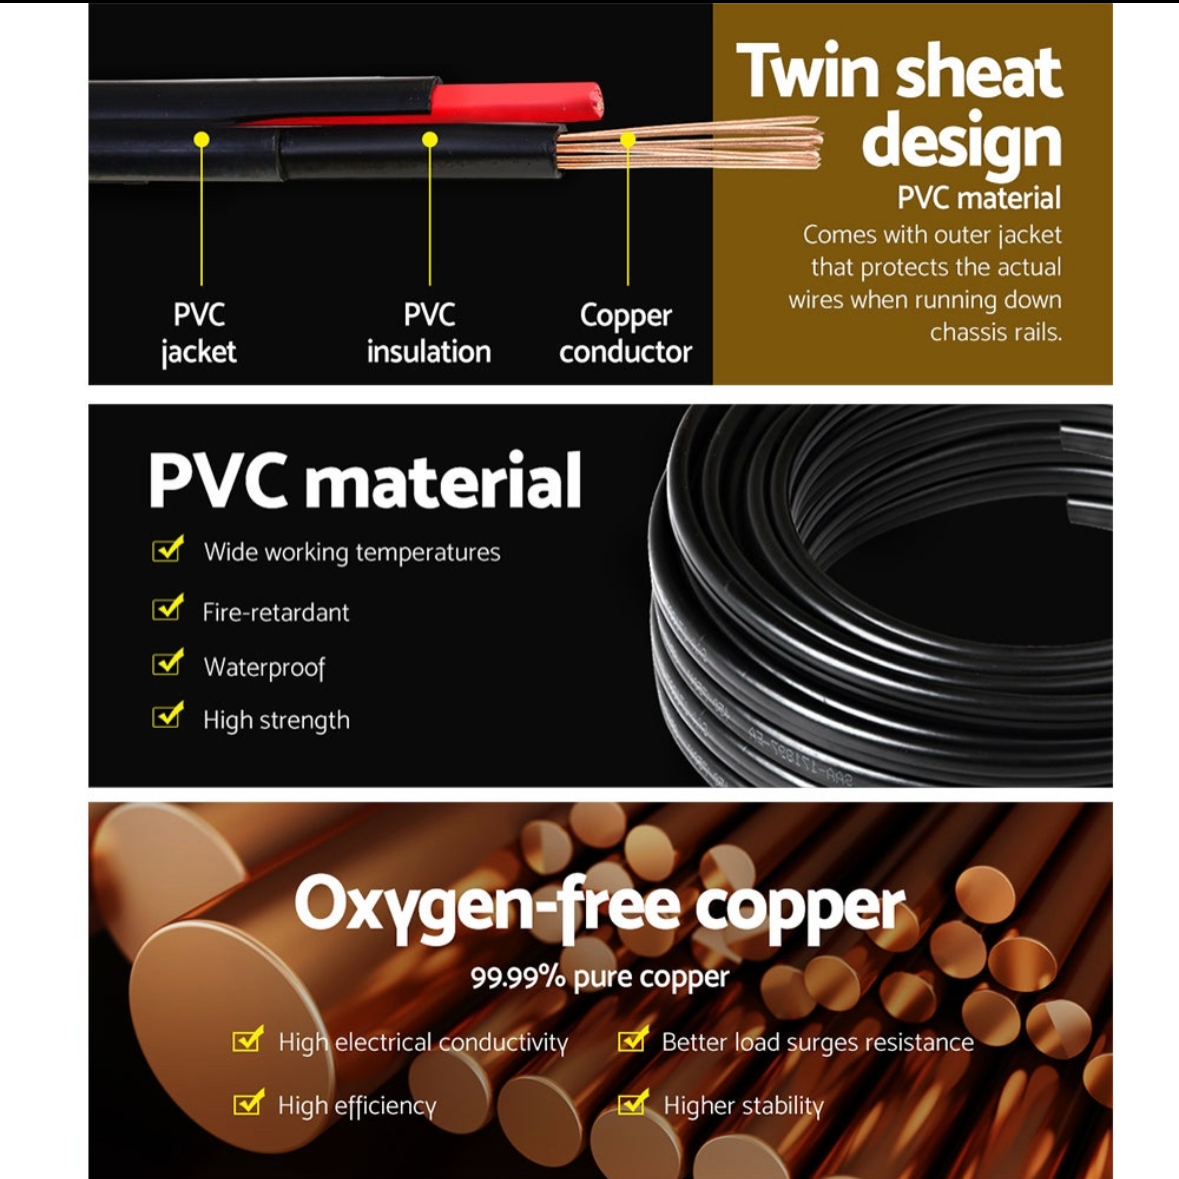 2.5mm * 100m Twin Core Twin Sheath electrical Cable, Red wire positive, Black wire negative. Australian Standards: SAA-certified. Conductor: Oxygen free plain copper wire to AS/NZ 1125. Insulation: V-90 PVC to AS/NZ 3808. Sheath: 5V-90 PVC AS/NZ 3808.  Voltage: up to 450V AC/DC. AMP: 11A Core No.: 2. Strand Diameter: 7/0.32mm.